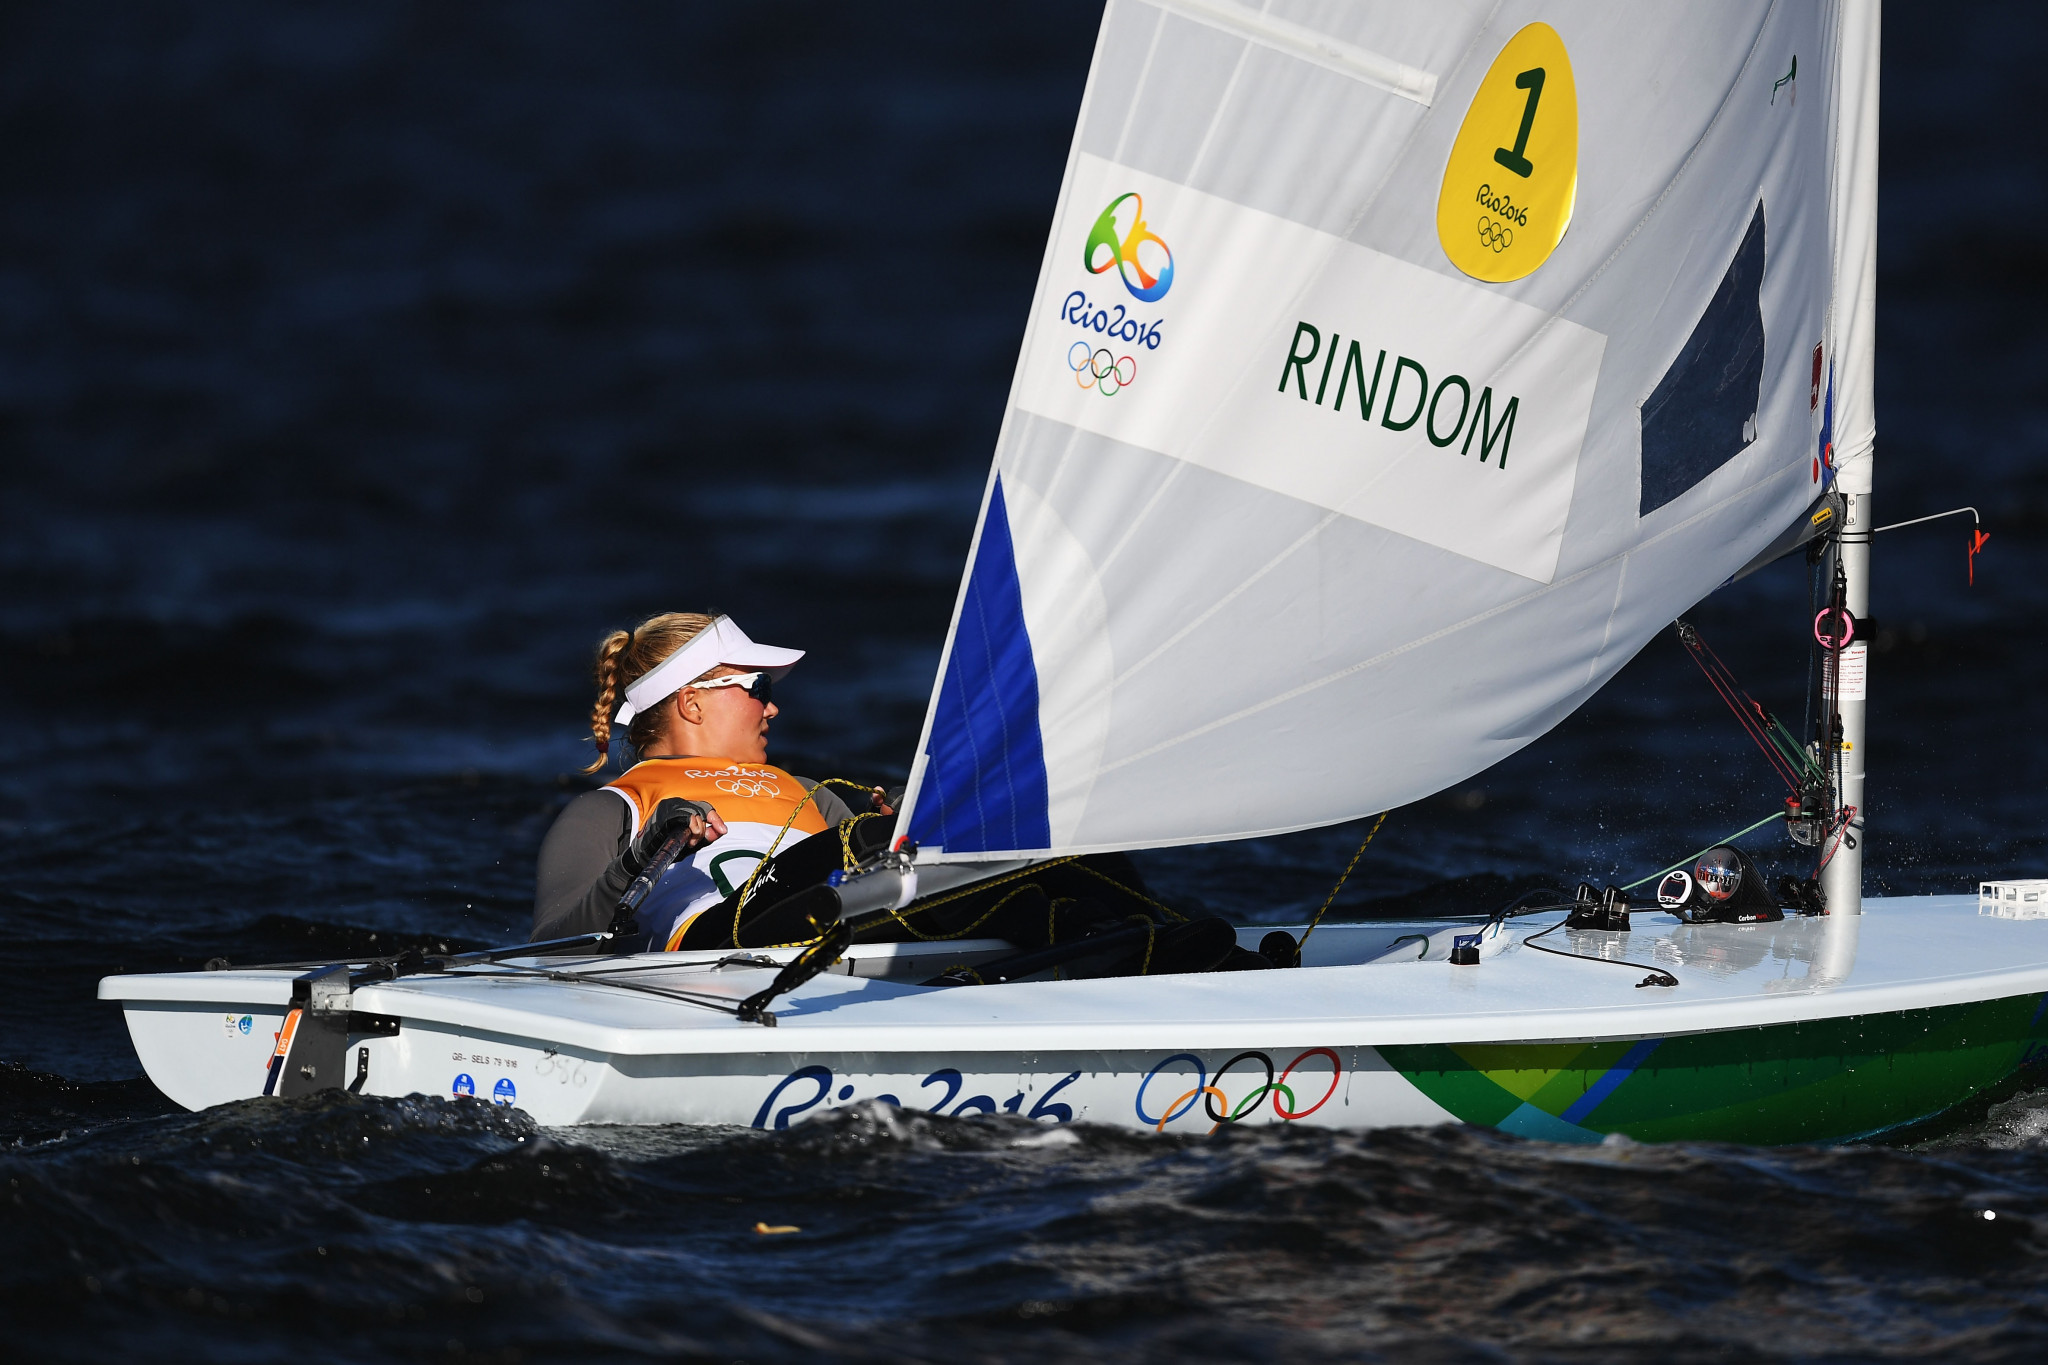 Rindom overcomes difficult conditions to lead ILCA Laser Radial Women's World Championship